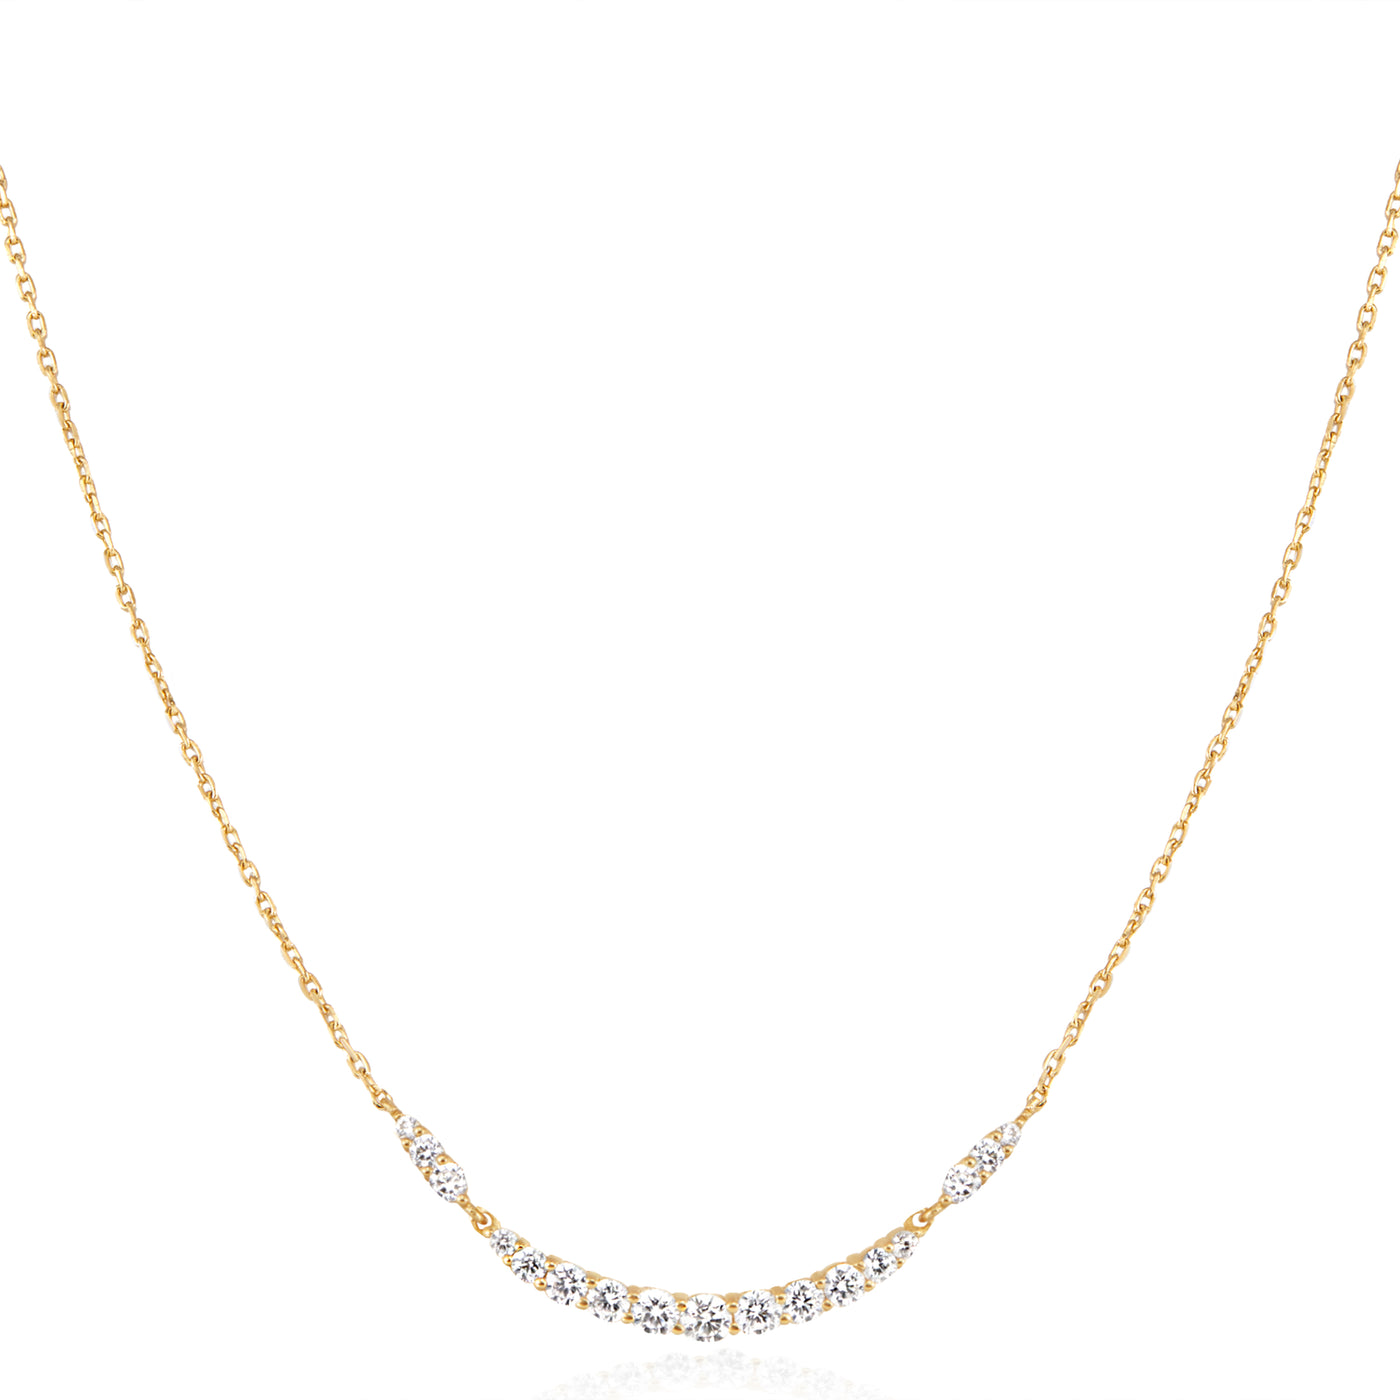 Ania Haie Yellow Gold Bar Necklace N056-02G